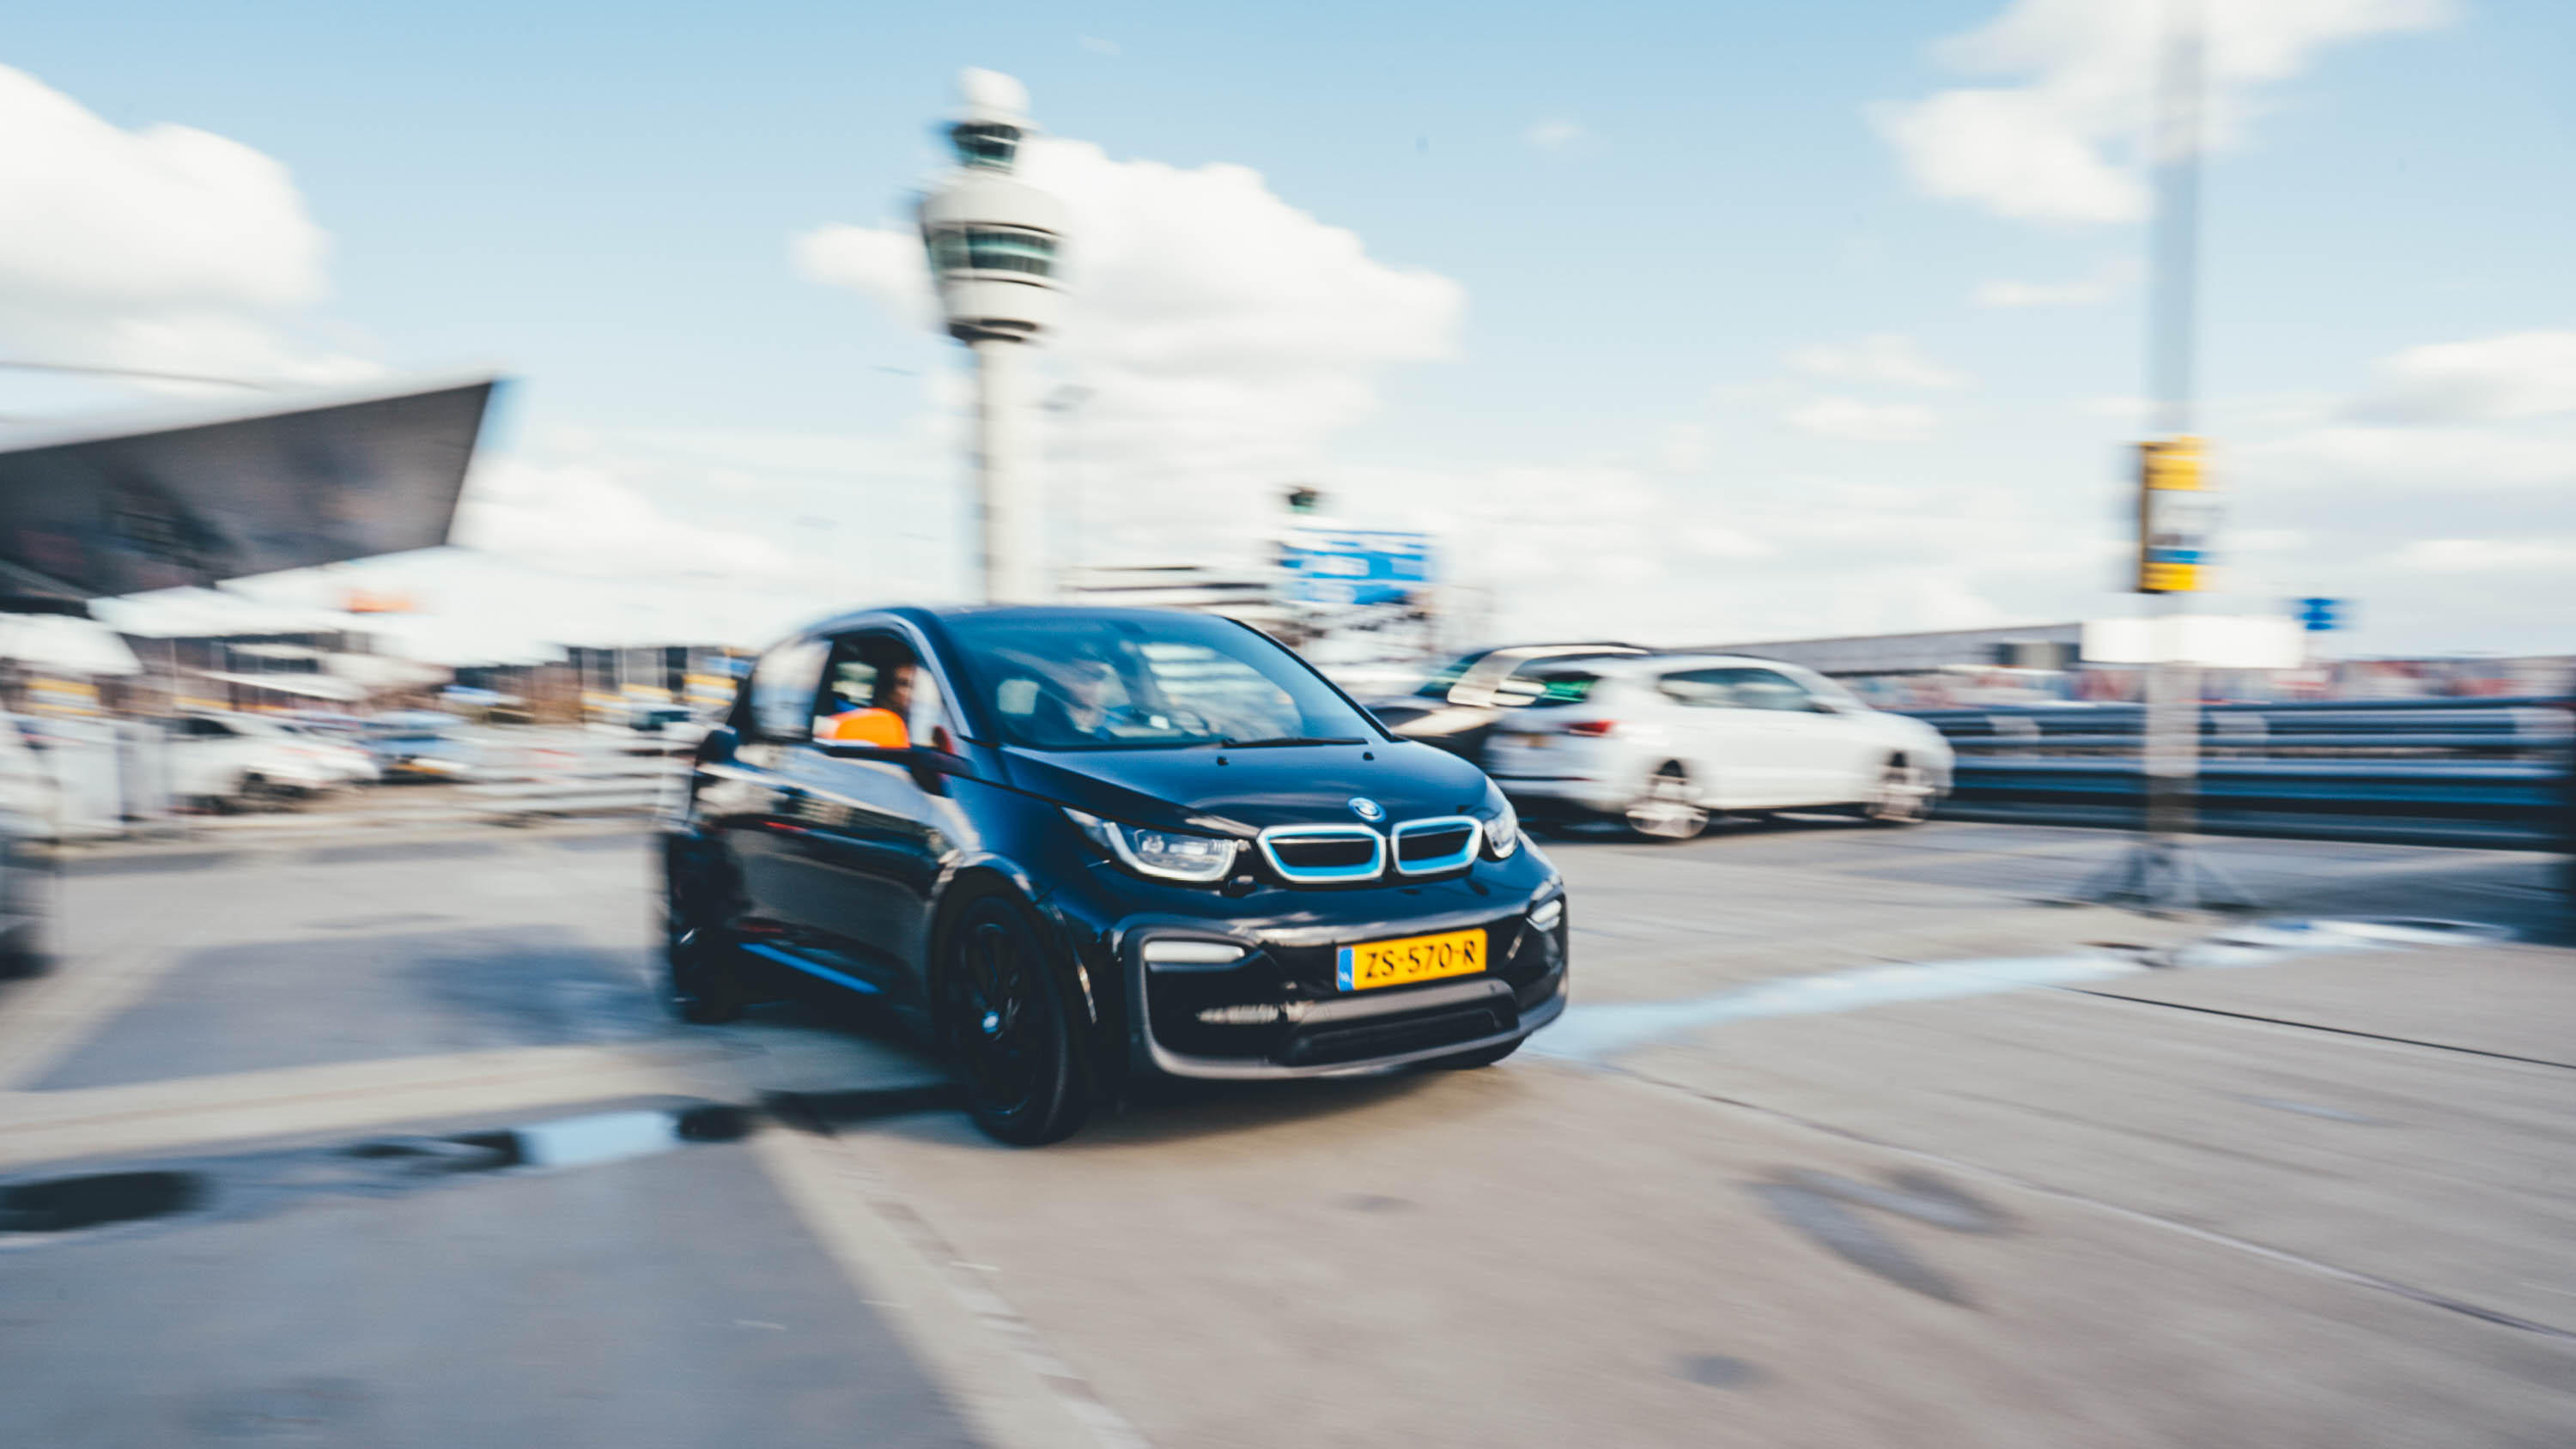 Foto's SIXT share Luchthaven Schiphol